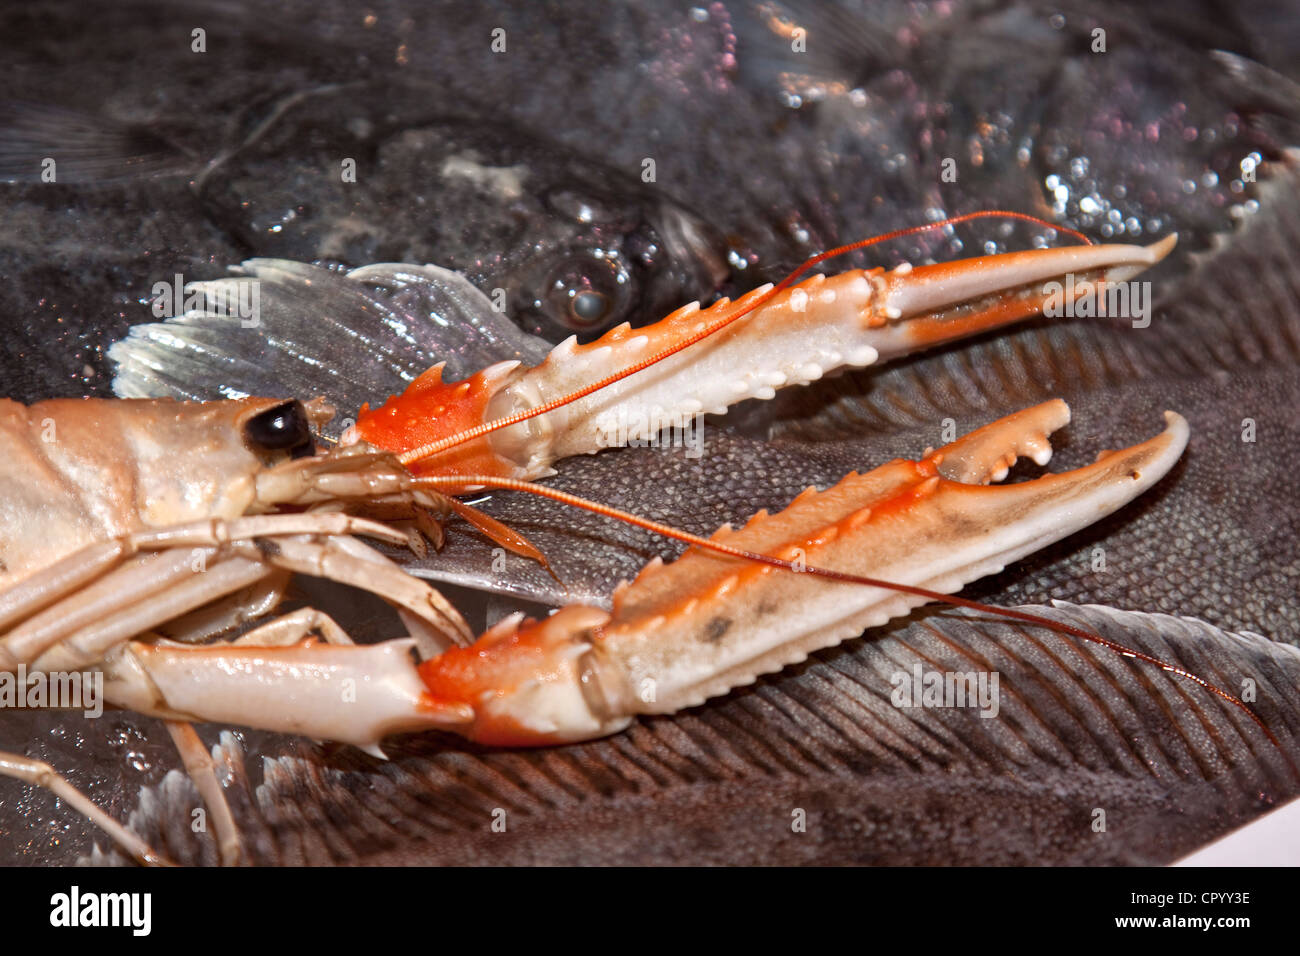 Norway Lobster (Nephrops norvegicus) with bound claws Stock Photo